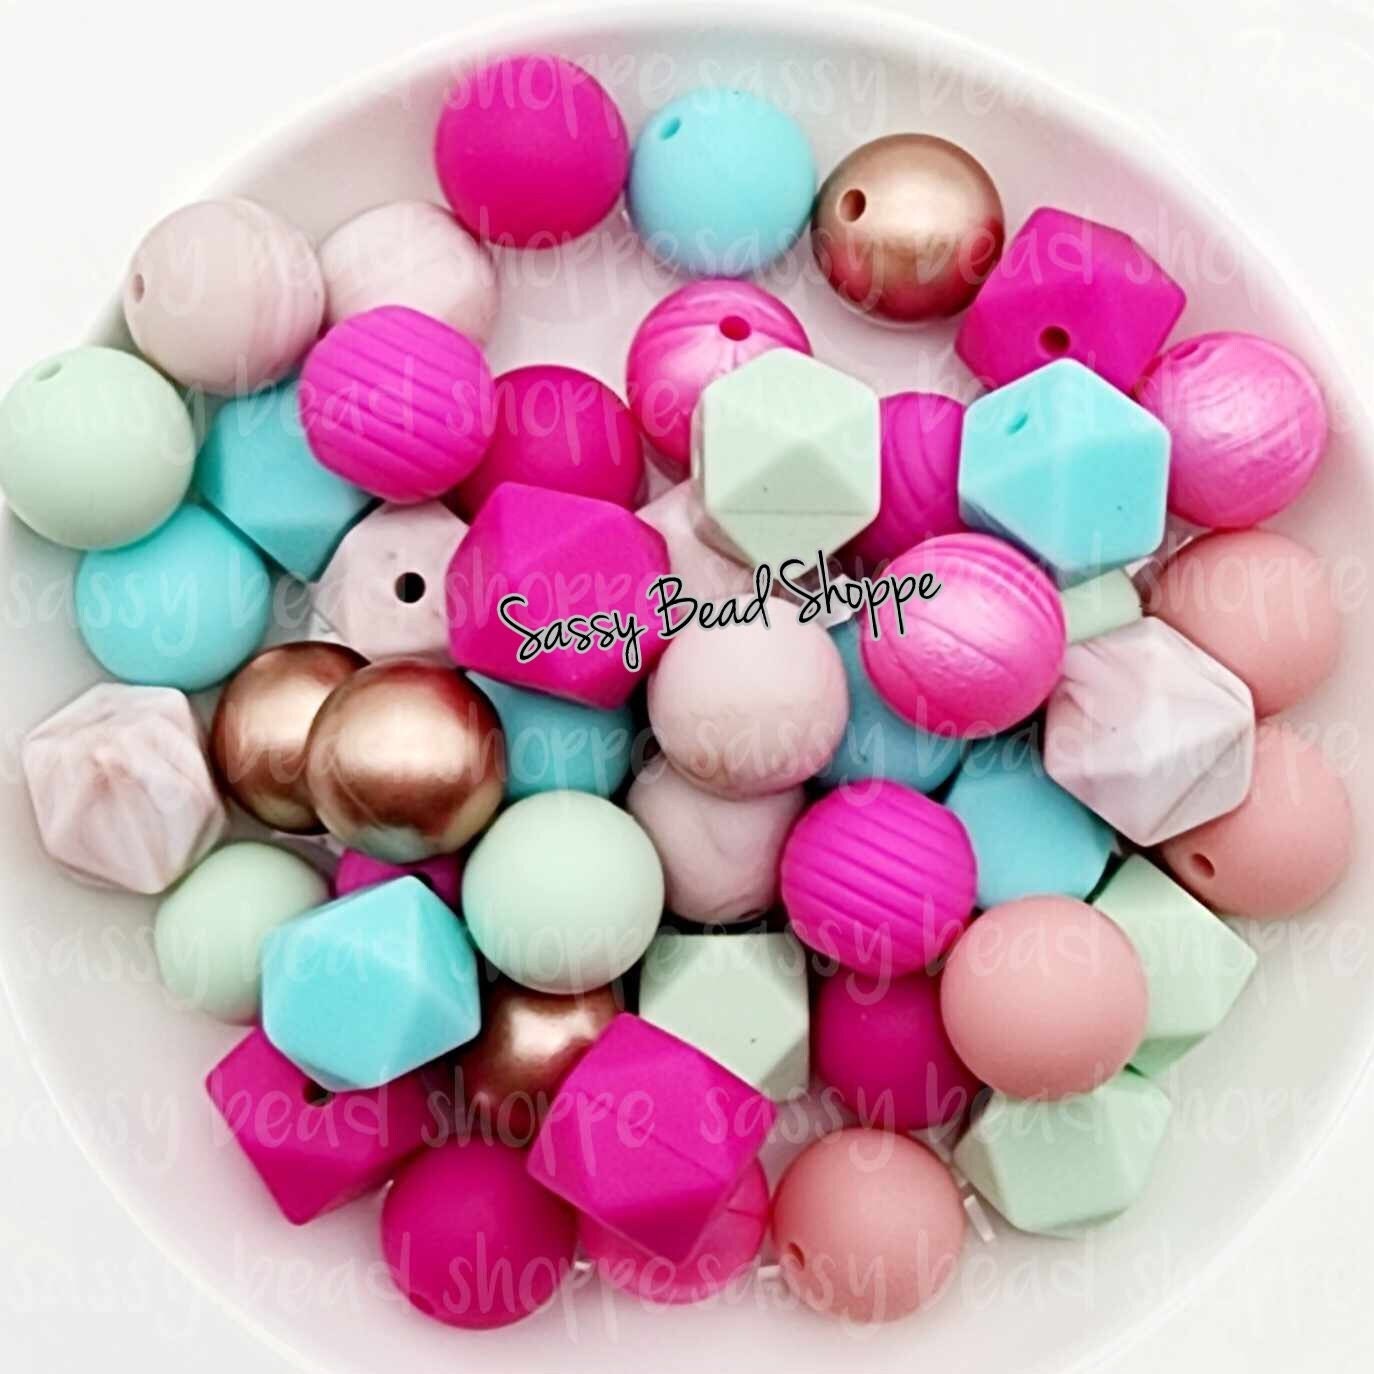 Spring Fever Silicone Bead Mix, Set of 24, Bulk Mix of Silicone Beads,  Silicone Beads, Beaded Pens, Keychain, Beads for Pens, Pen Beads 